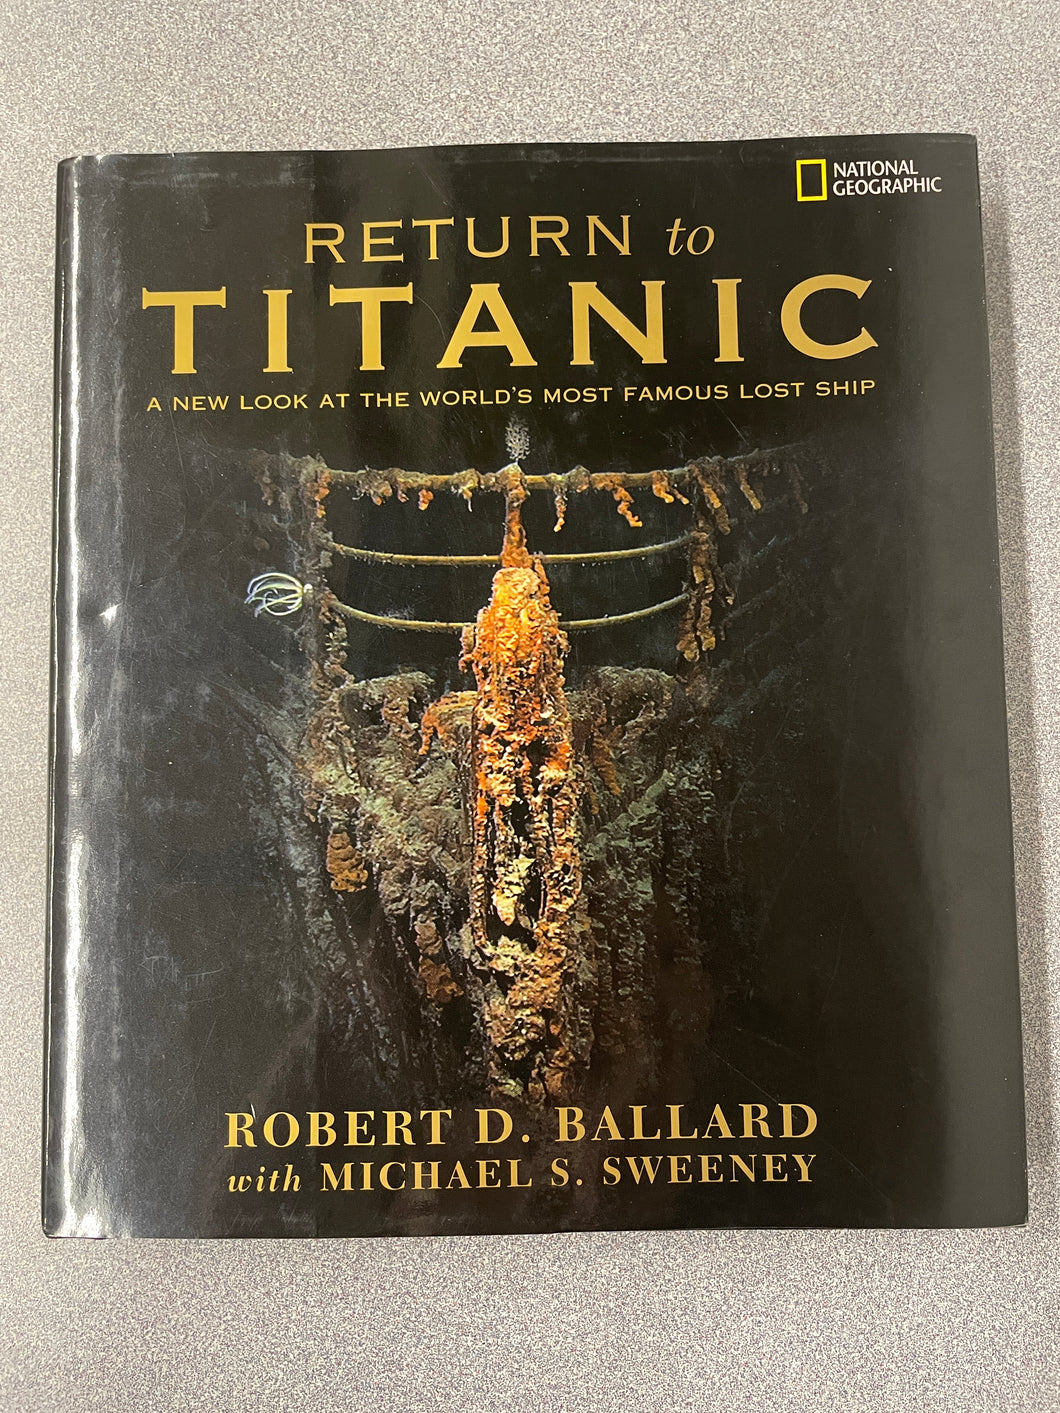 AN  Return to Titanic: A New Look at the World's Most Famous Lost Ship, Ballard, Robert D. and Michael S. Sweeney [2004] N 5/24